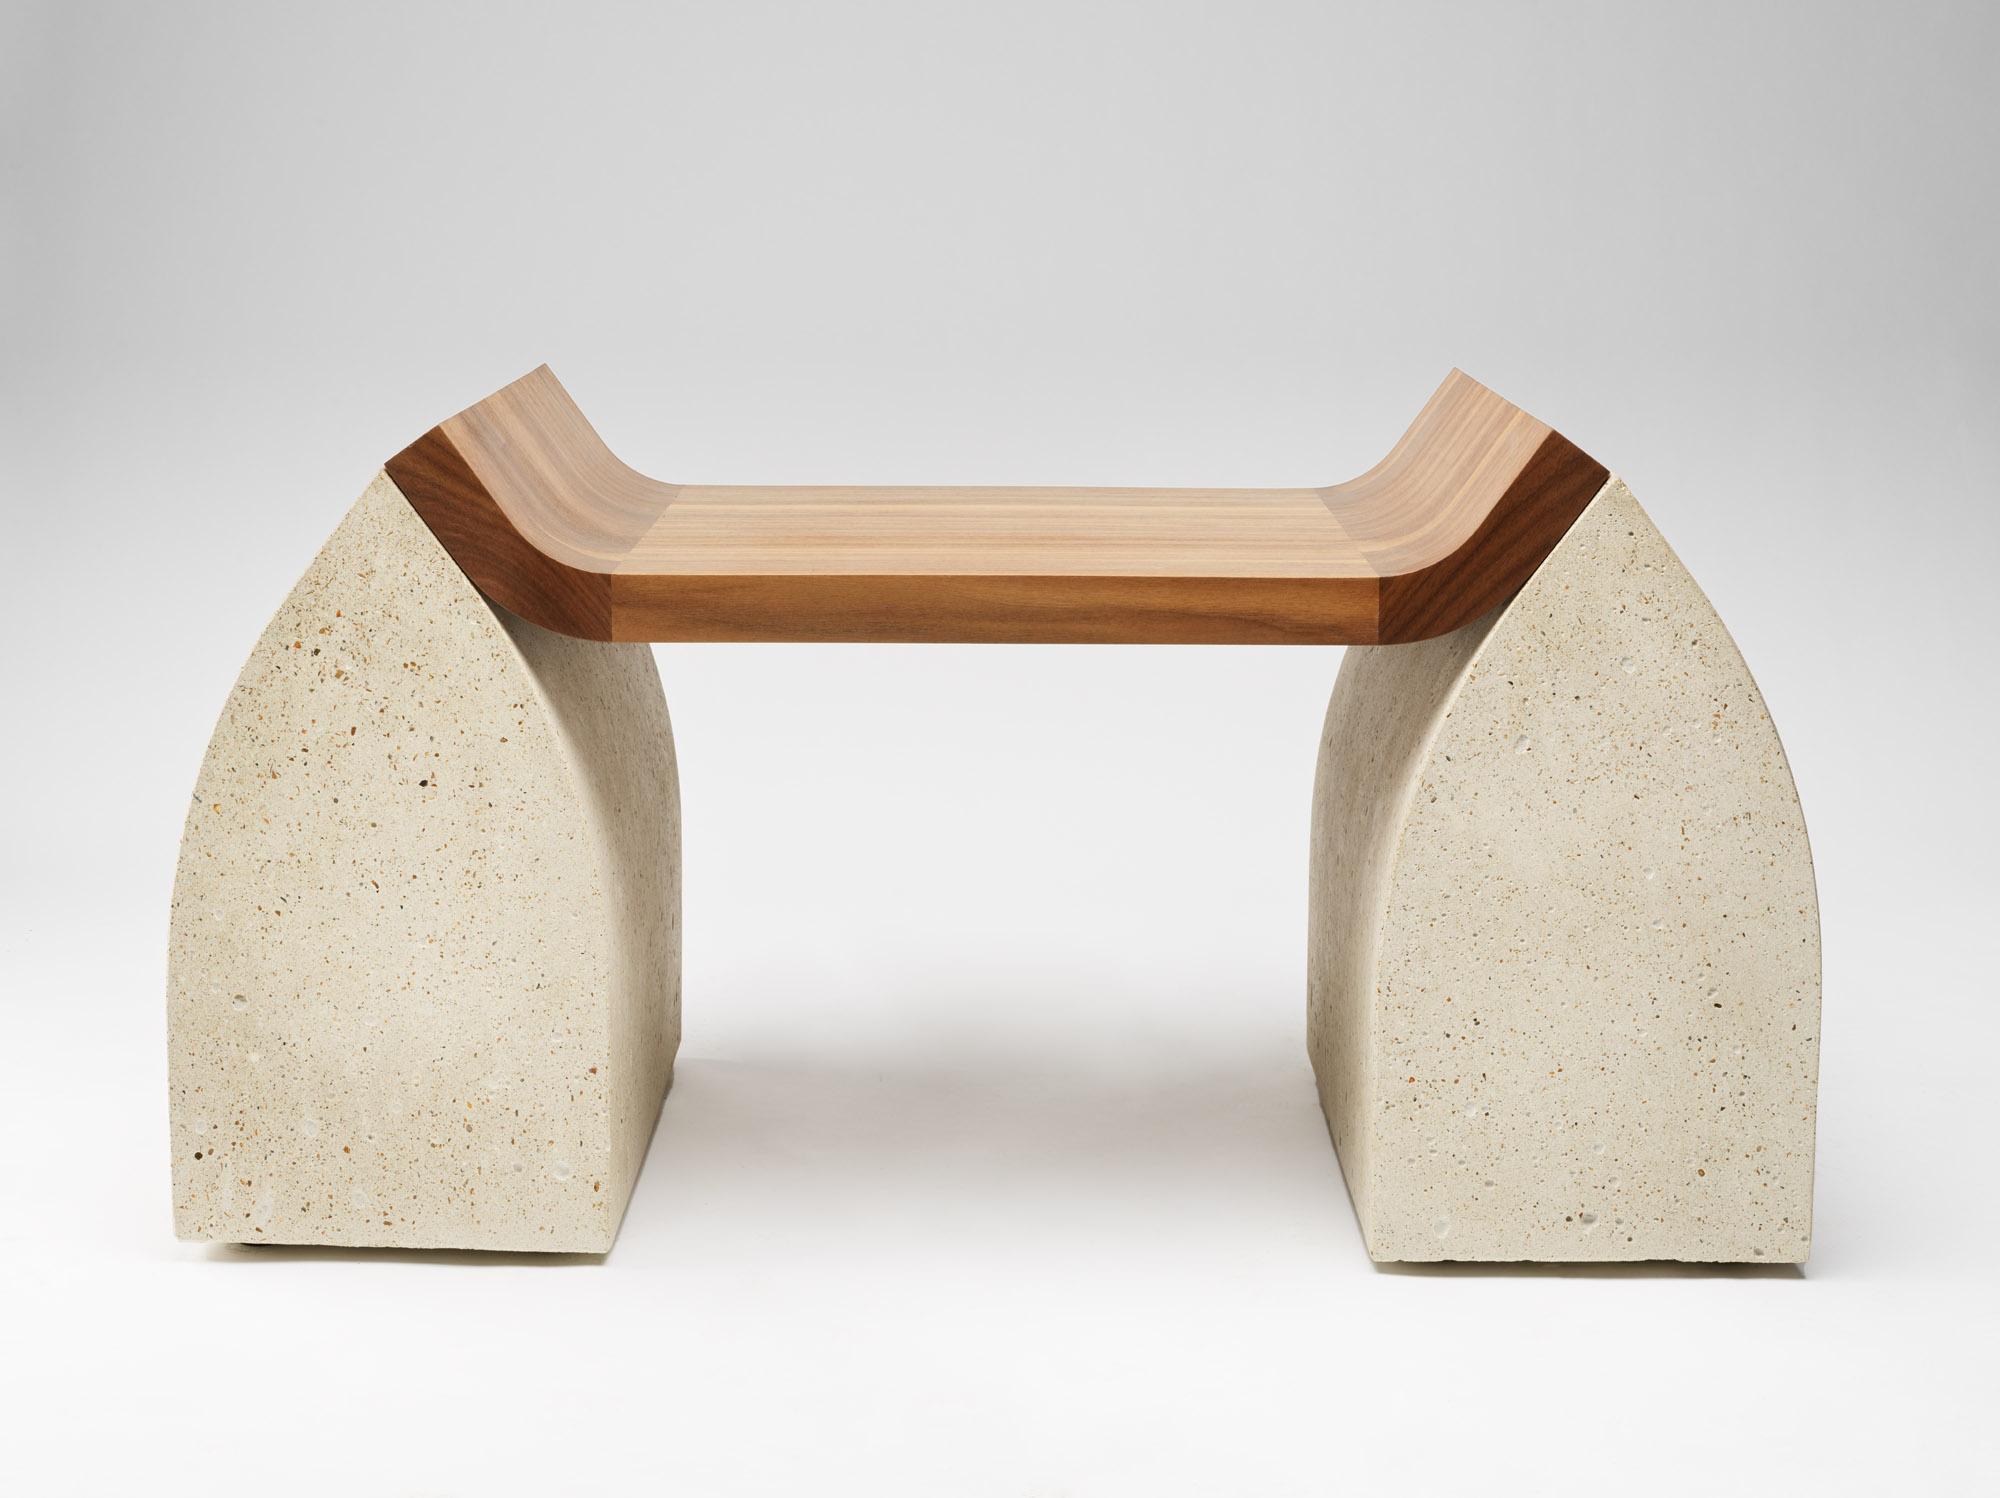 Traaf Bench by Tim Vranken
Materials: colored oak (oiled), granite
Dimensions: 105 x 60 x H 46 cm 
Variations available.  

Tim Vranken is a Belgian furniture designer who focuses on solid, handmade furniture. Throughout his designs the use of